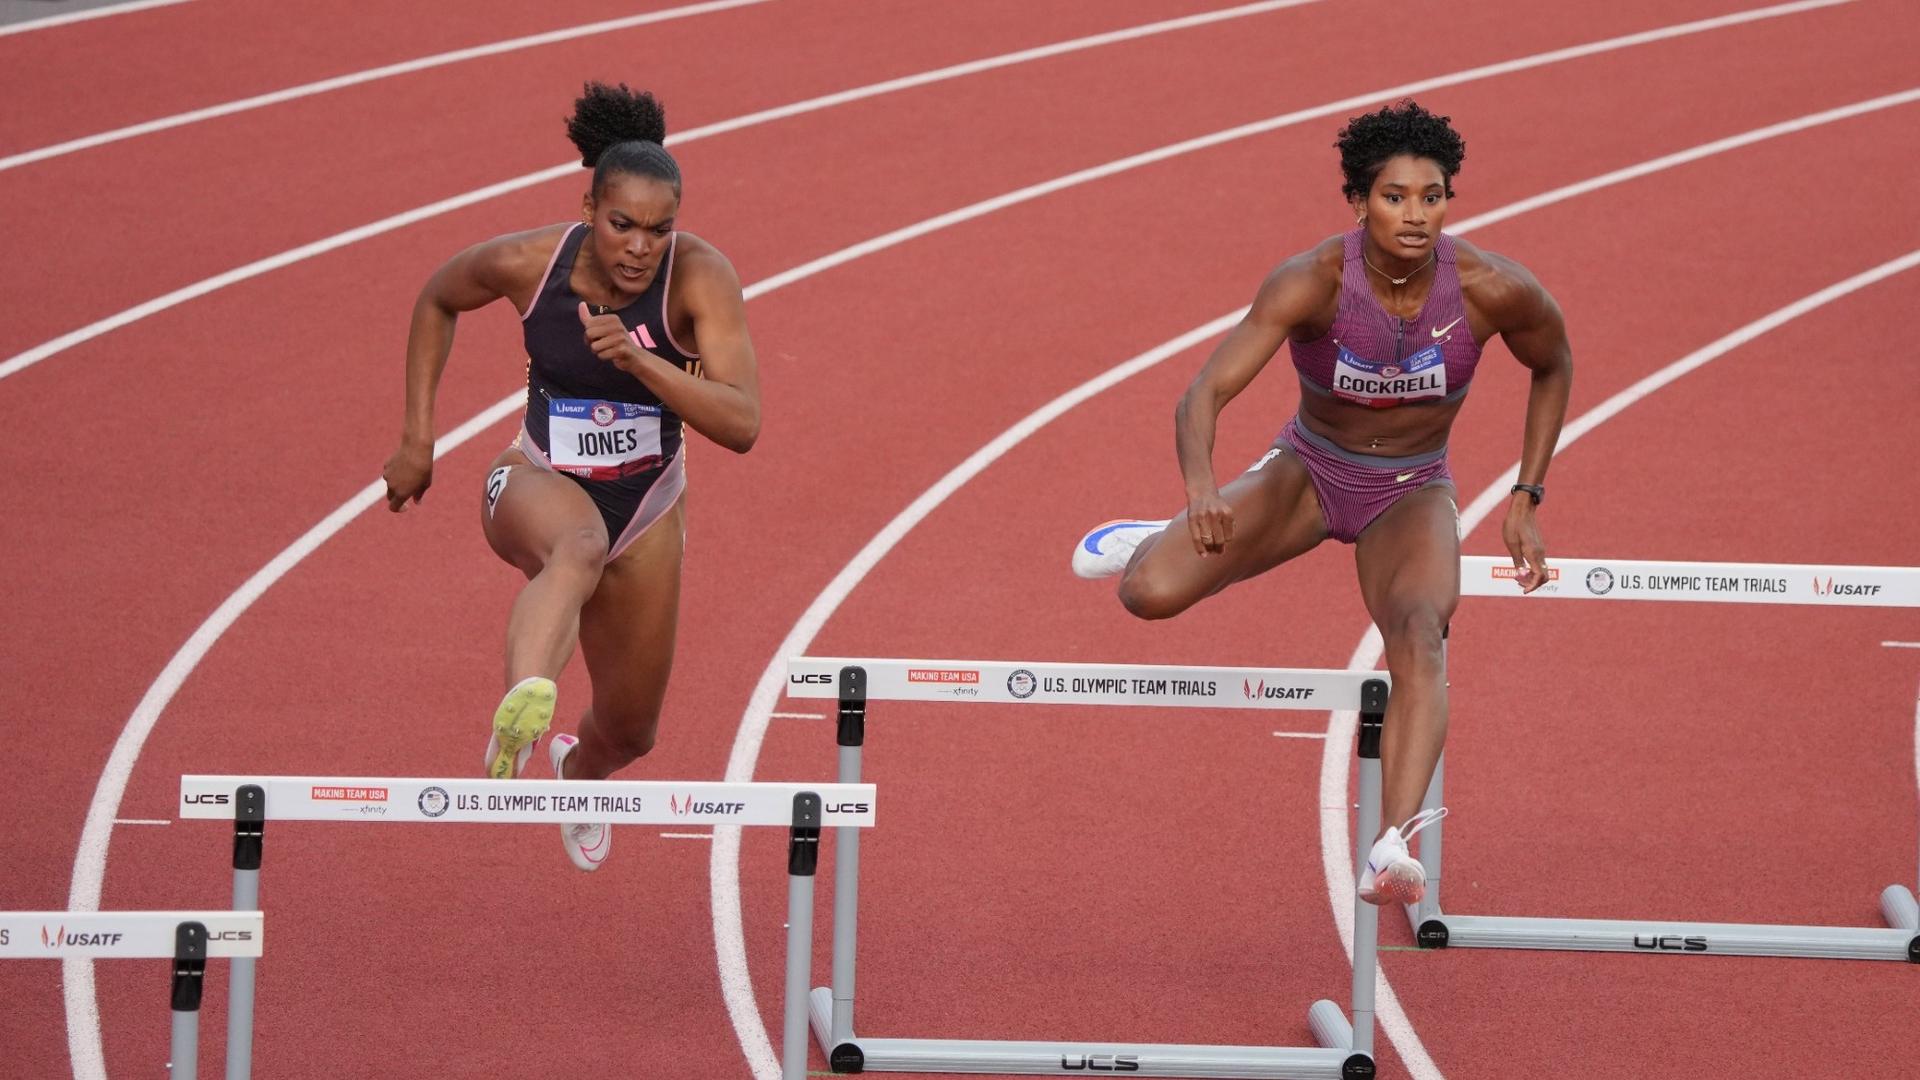 Jones, Cockrell, Muhammad In 400m H & Ali In 100m H Advance To Finals At 2024 U.S. Olympic T&F Team Trials